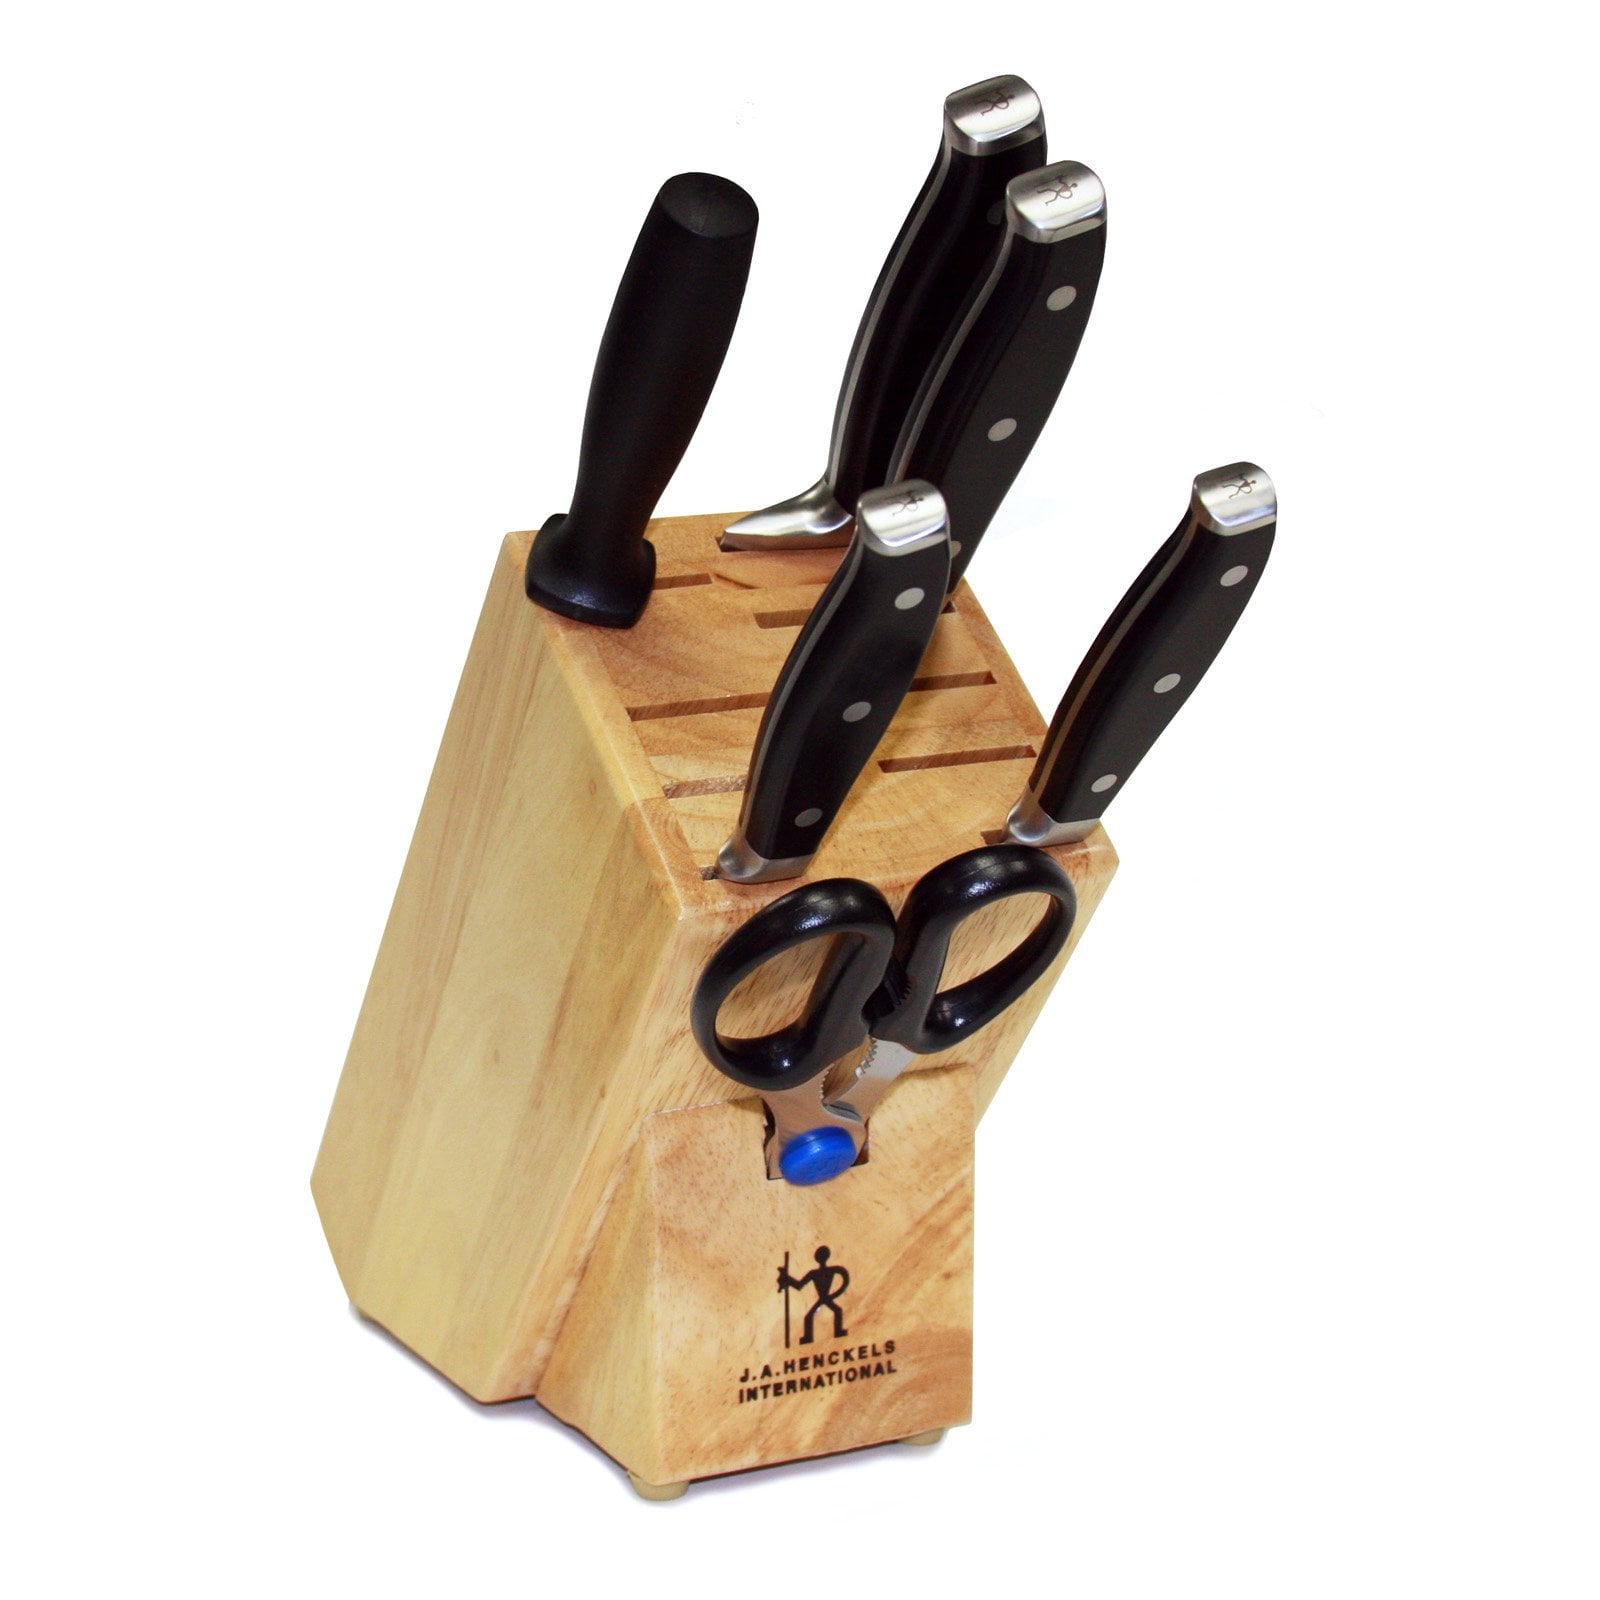 7-Piece German-steel Forged Knife Set with Wood Storage Block and